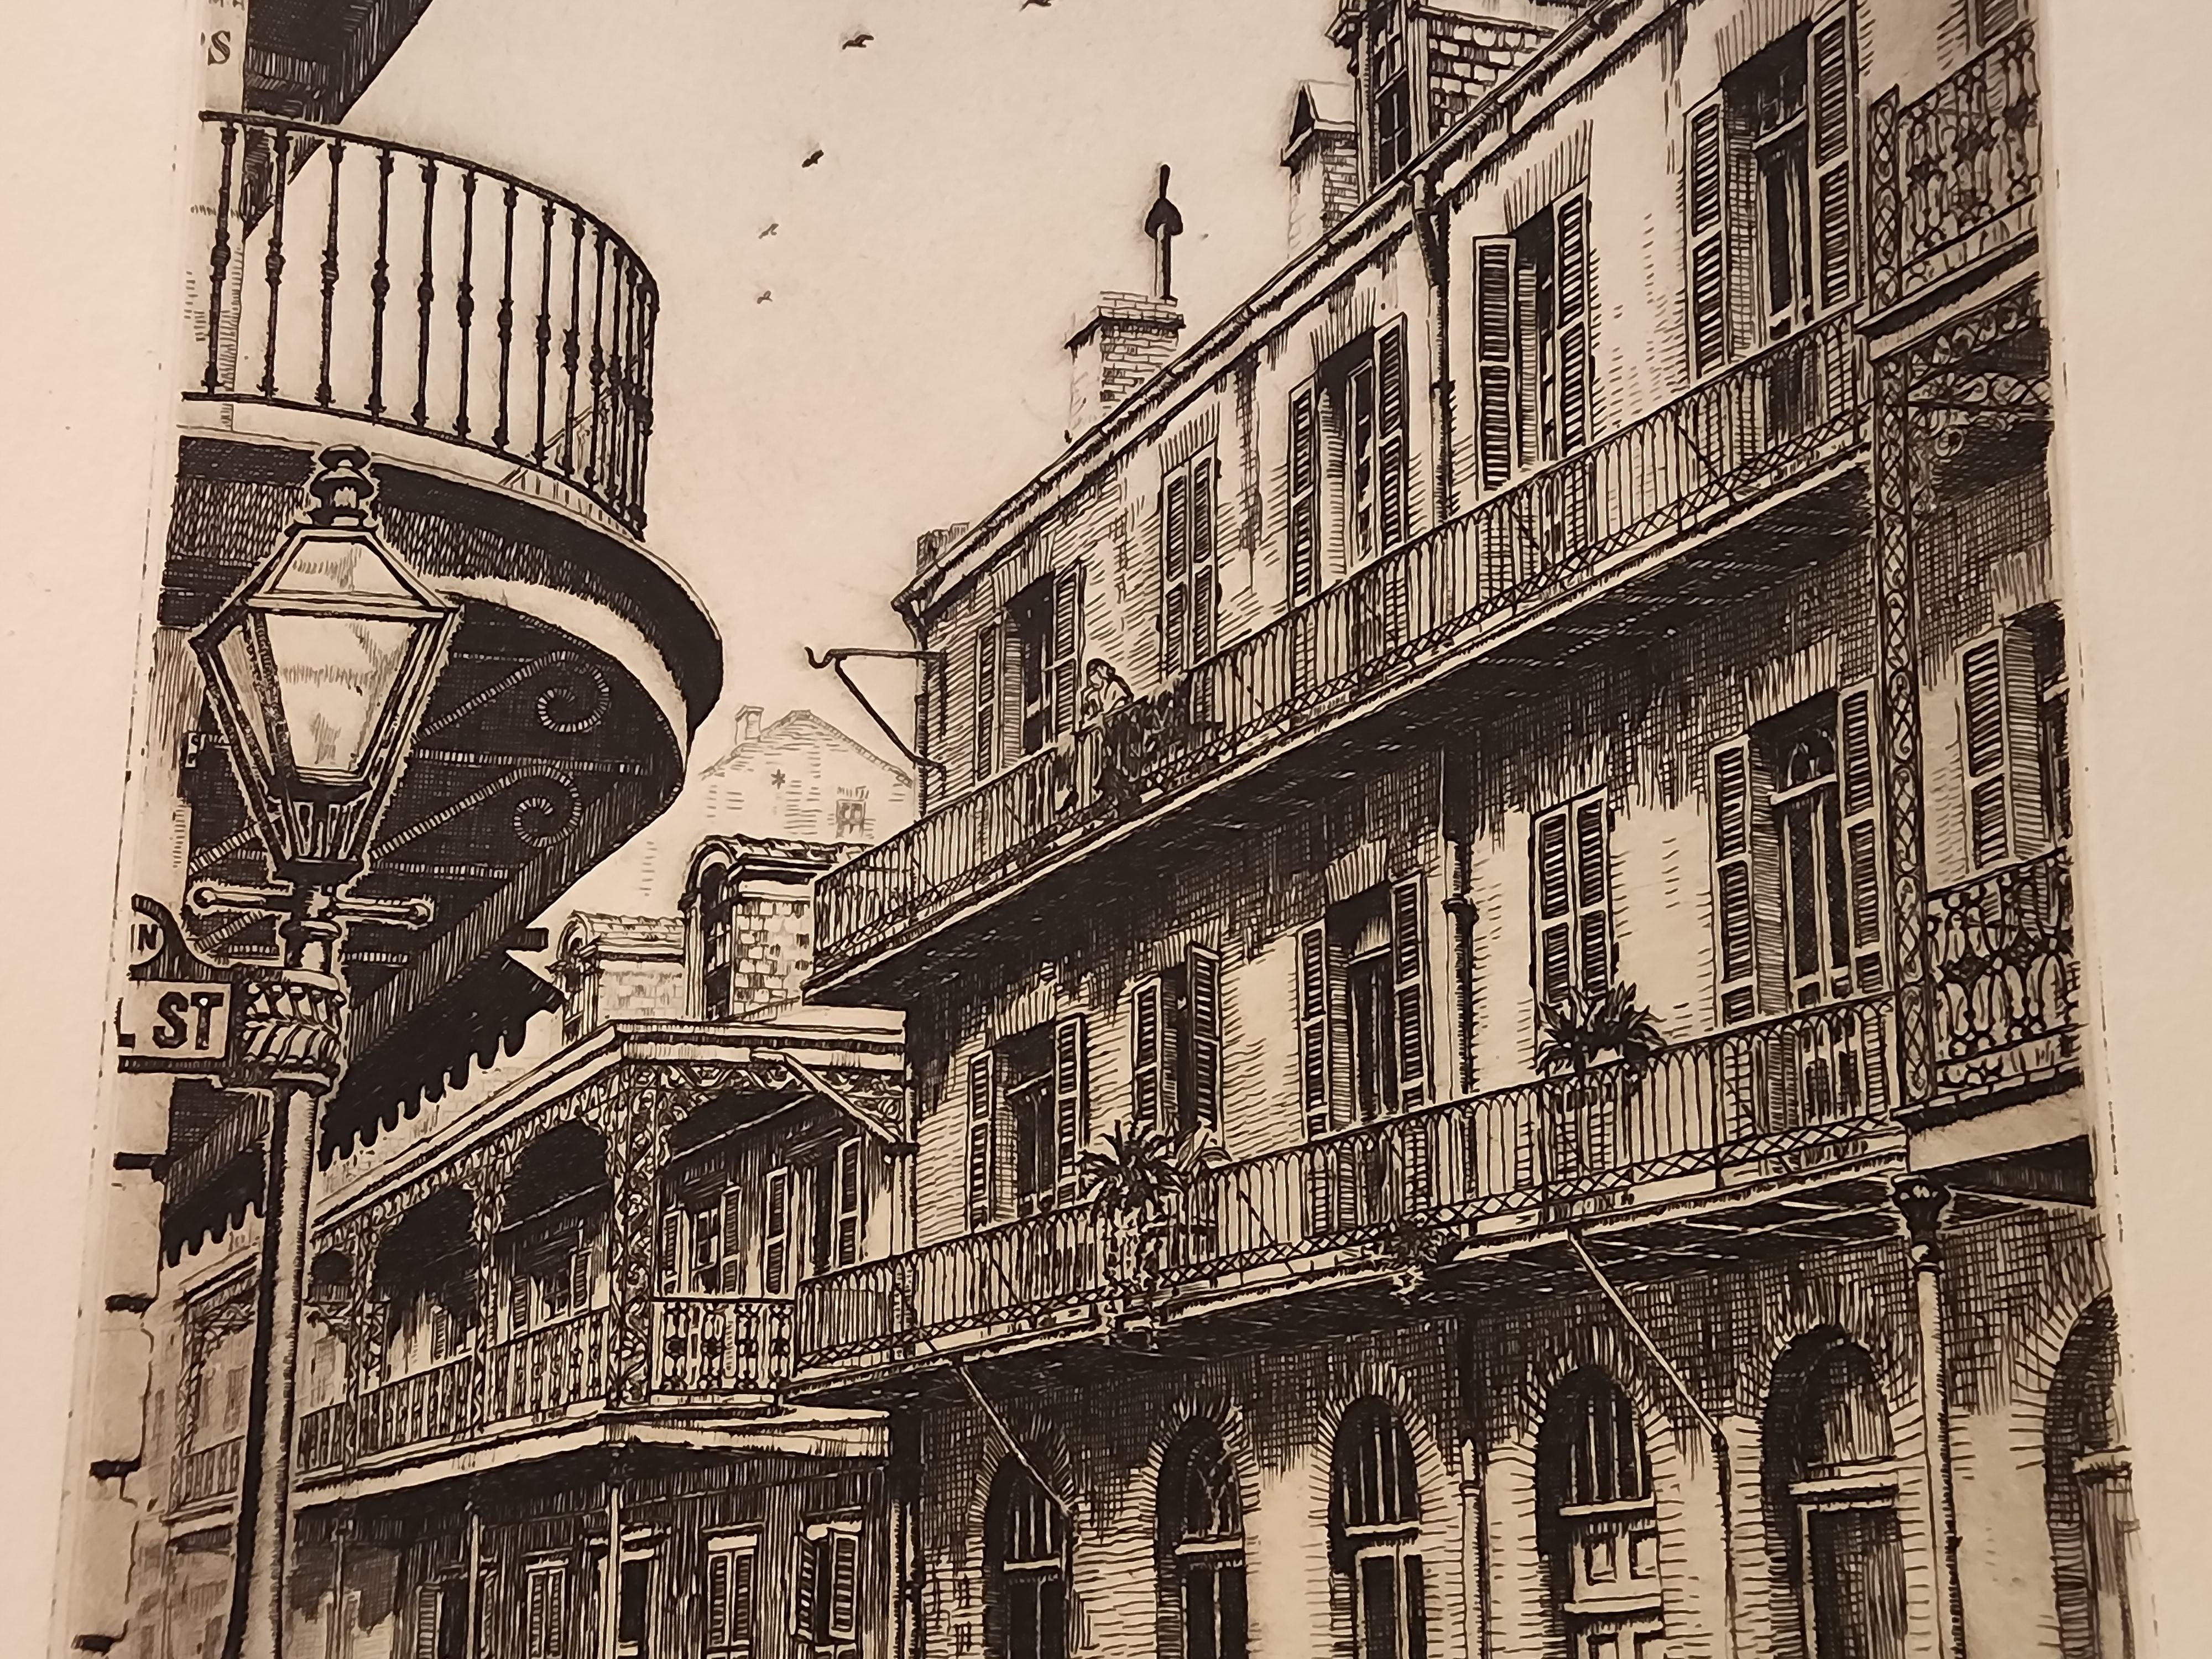 St. Ann St. from Royal, Old New Orleans - American Realist Print by Morris Henry Hobbs